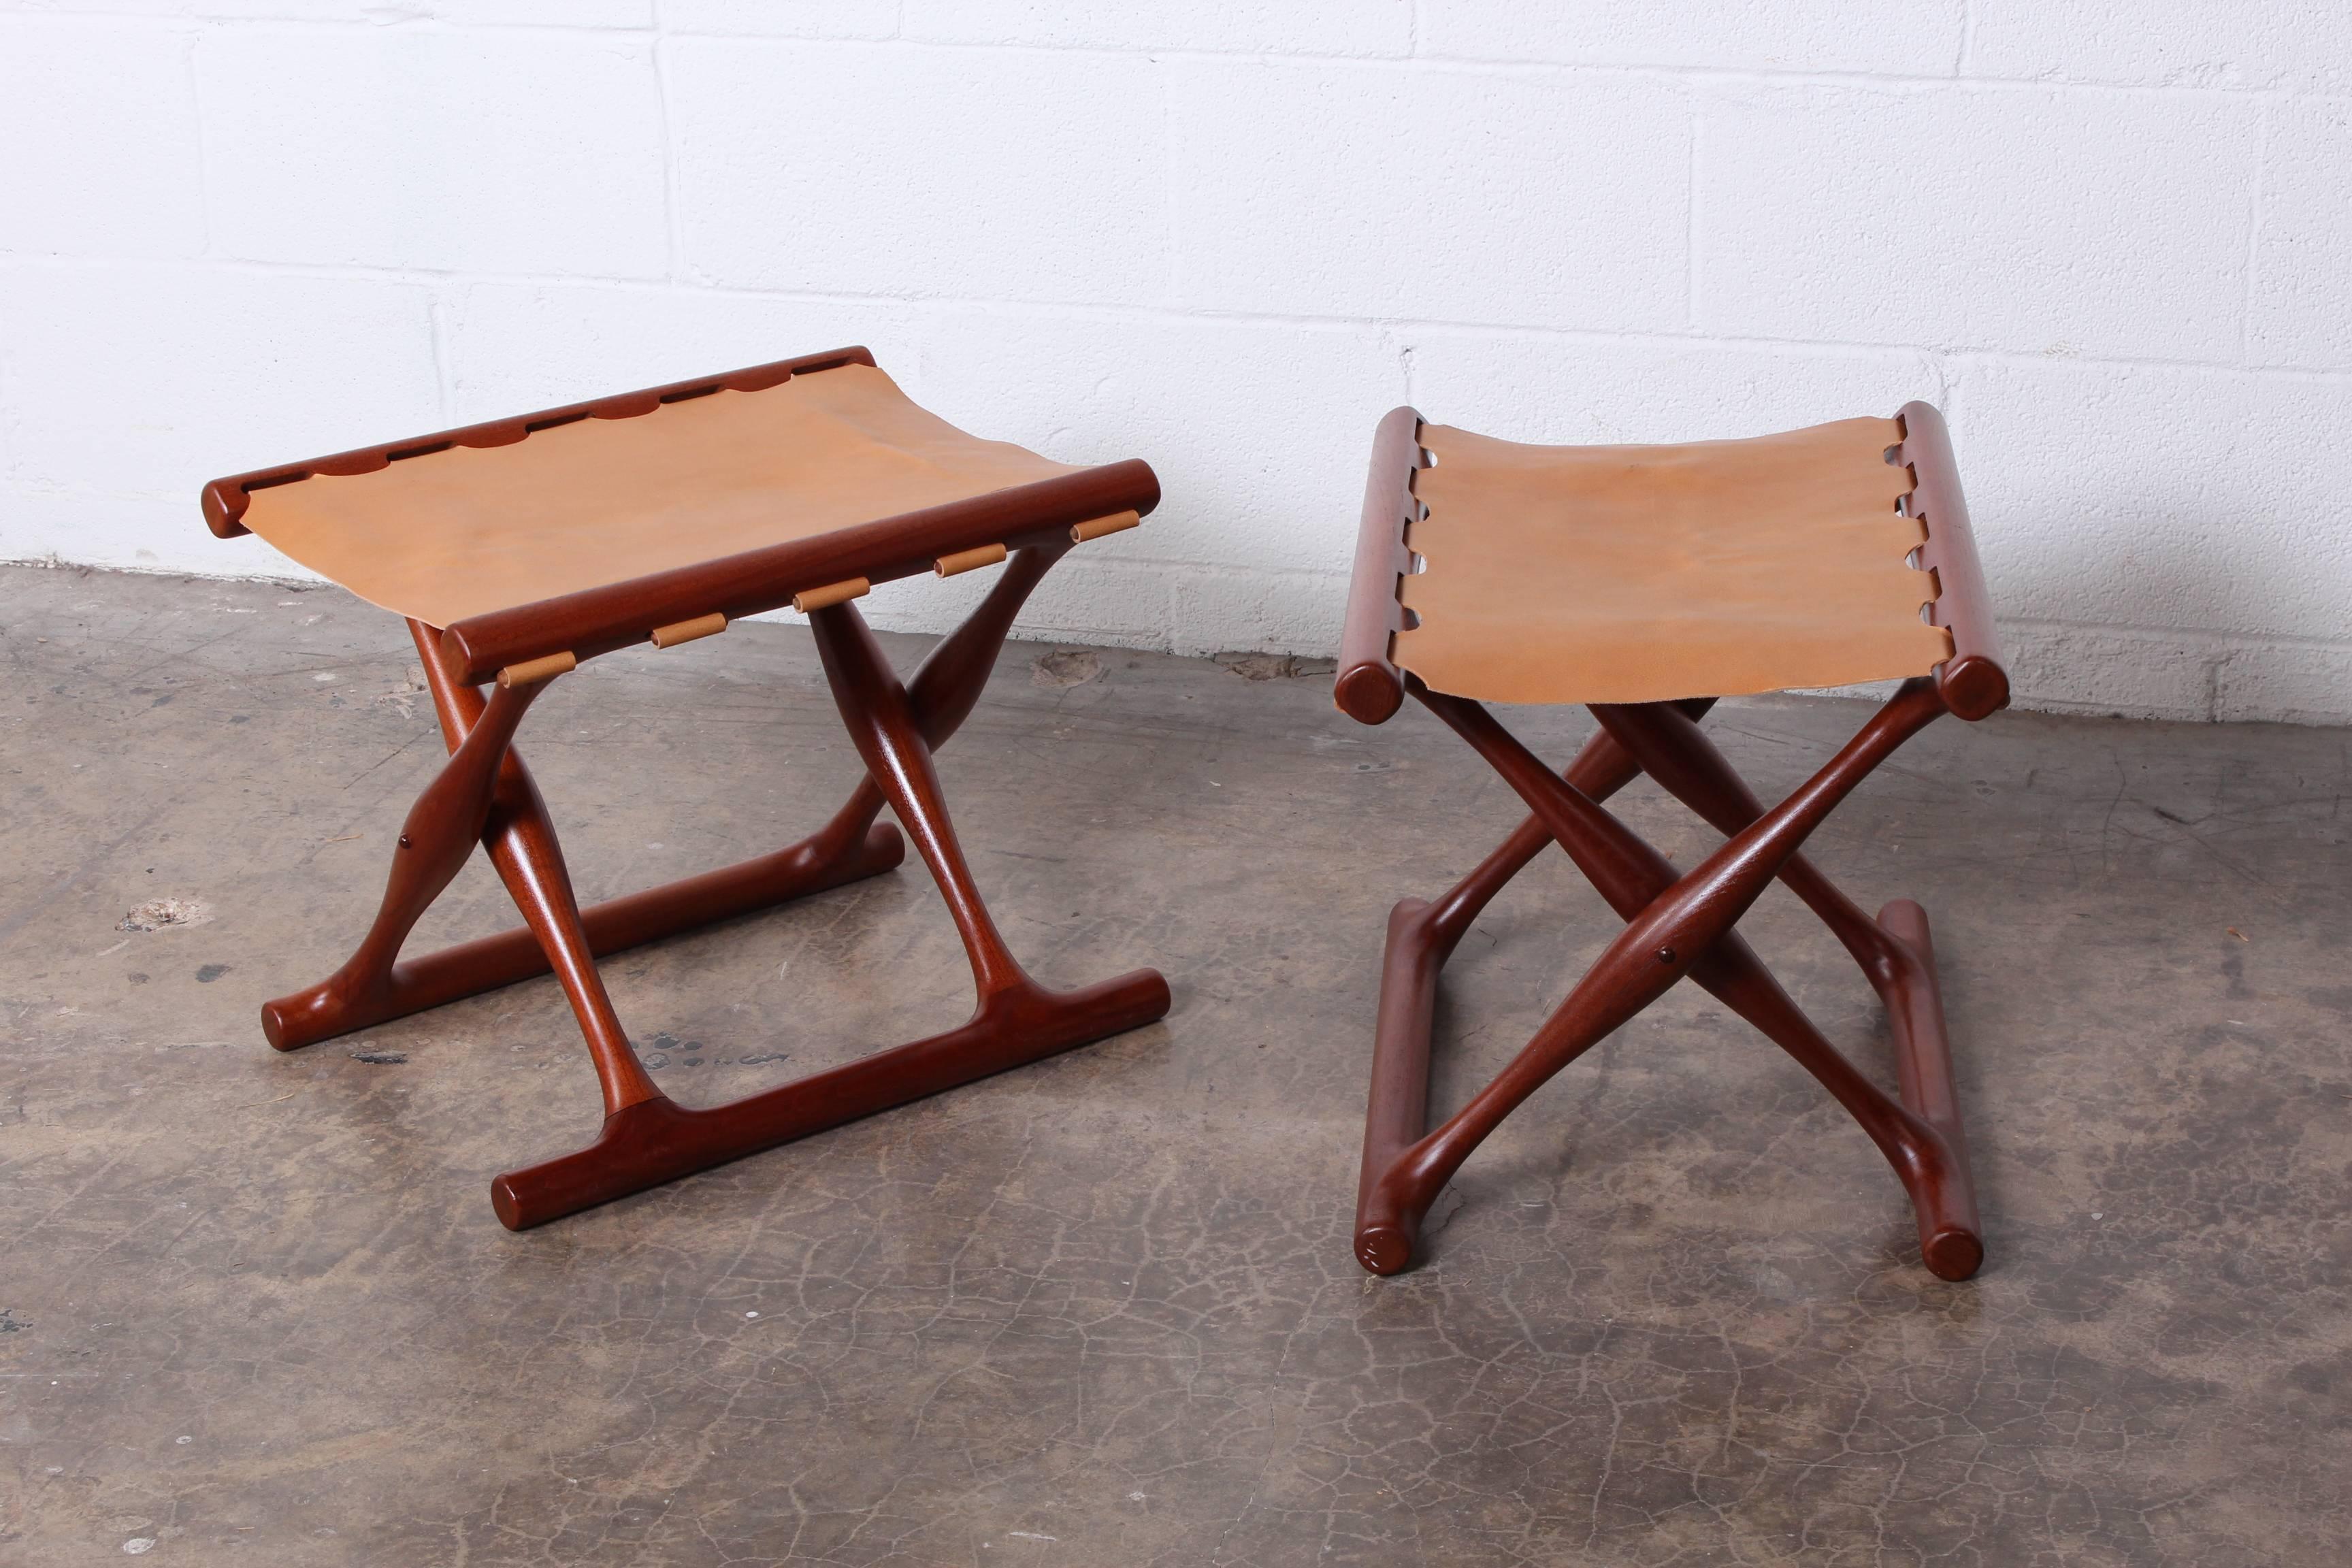 A pair of Danish teak and leather stools designed by Poul Hundevad.